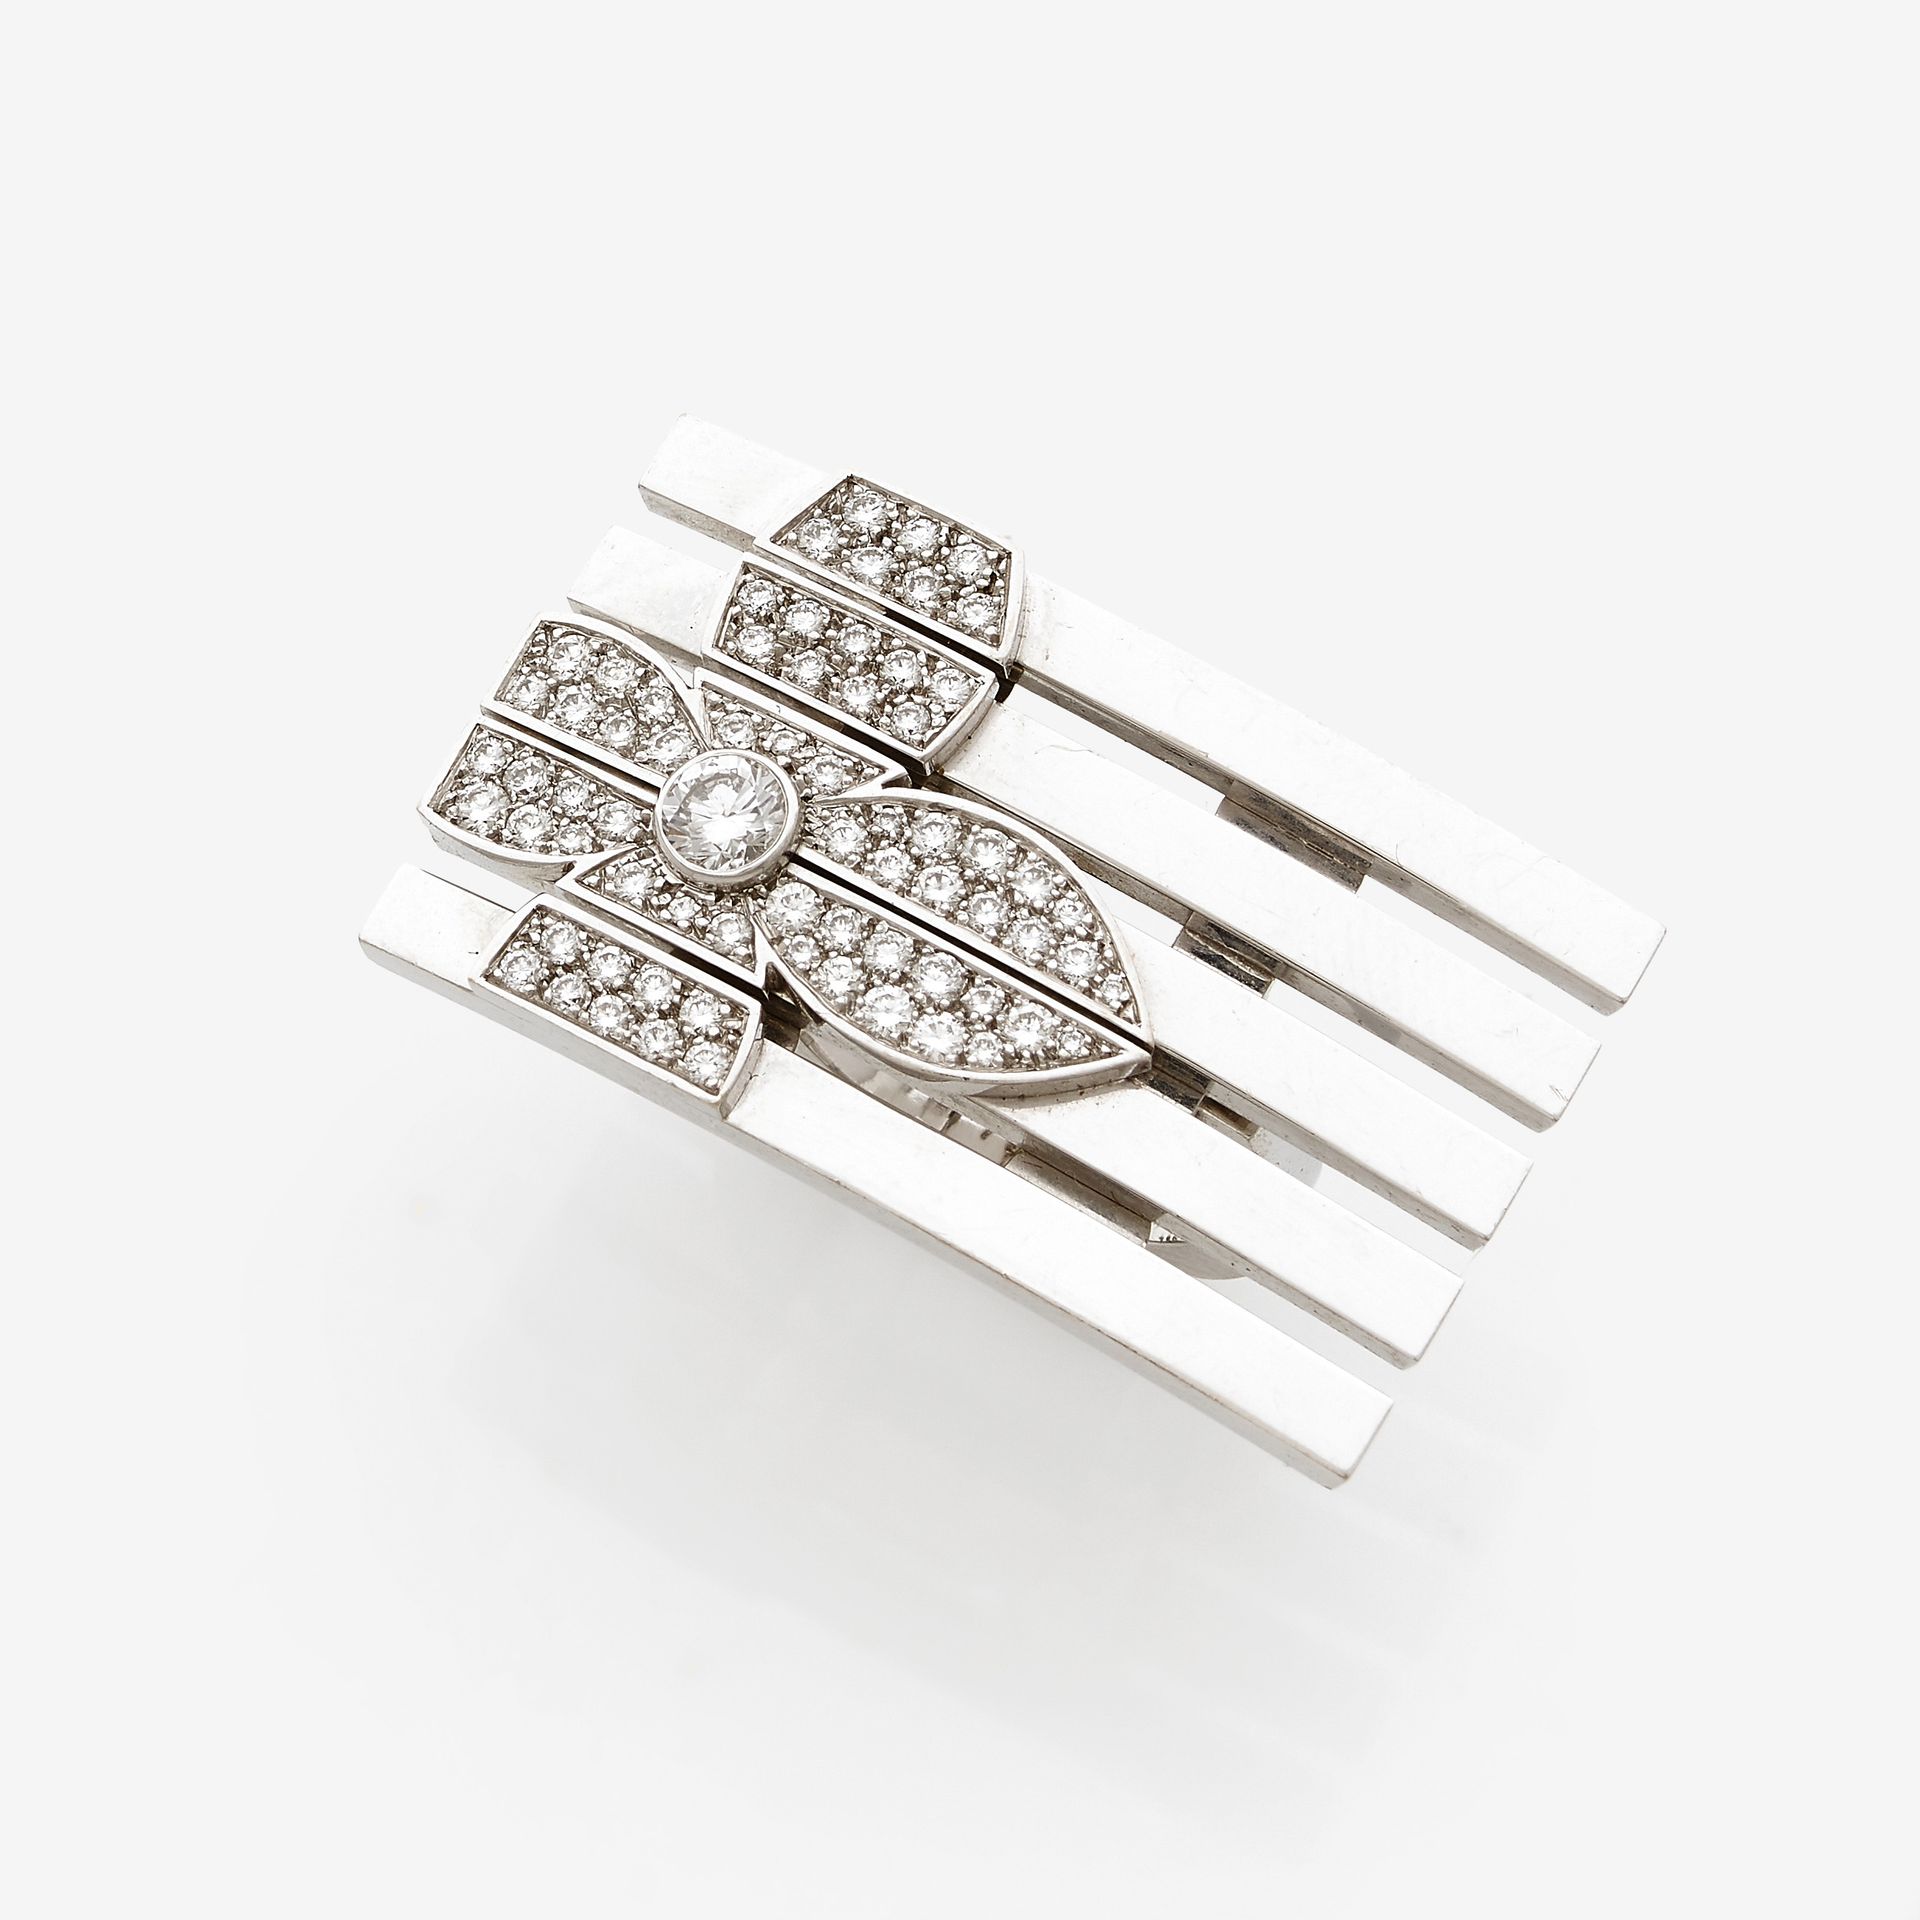 LOUIS VUITTON B BLOSSOM RING in white gold, rectangula…